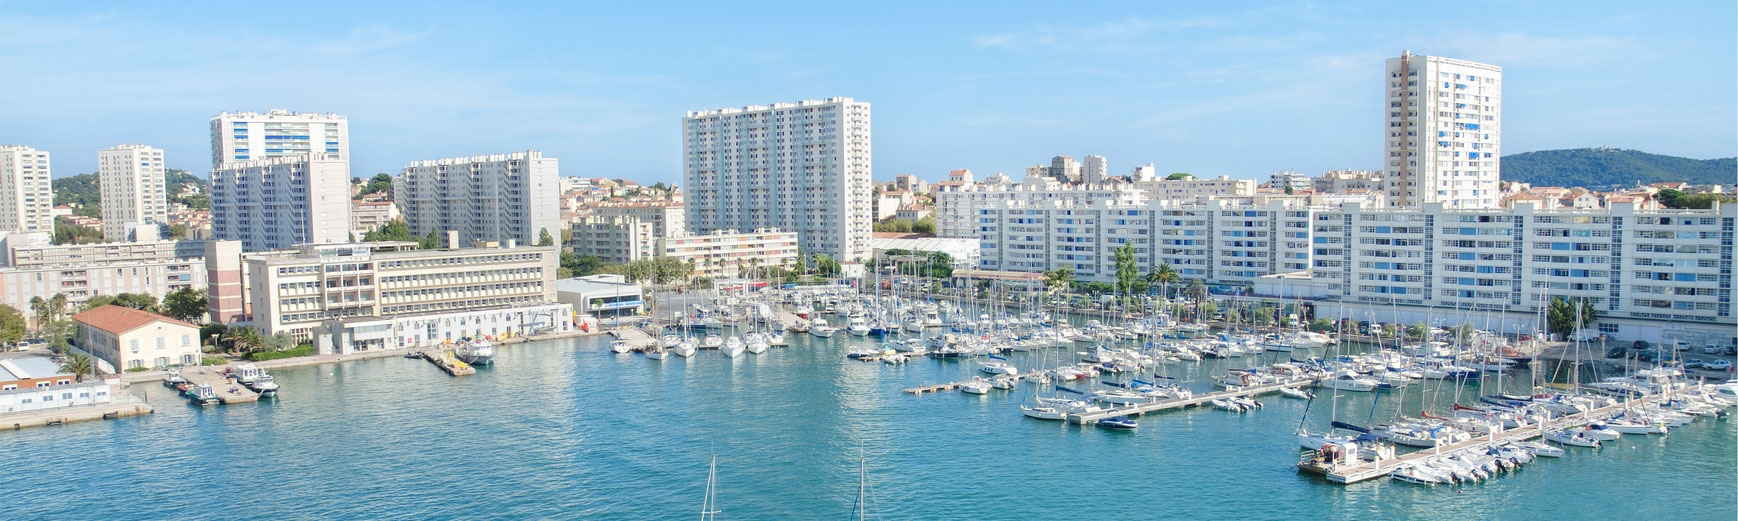 Toulon, France, view of the harbor